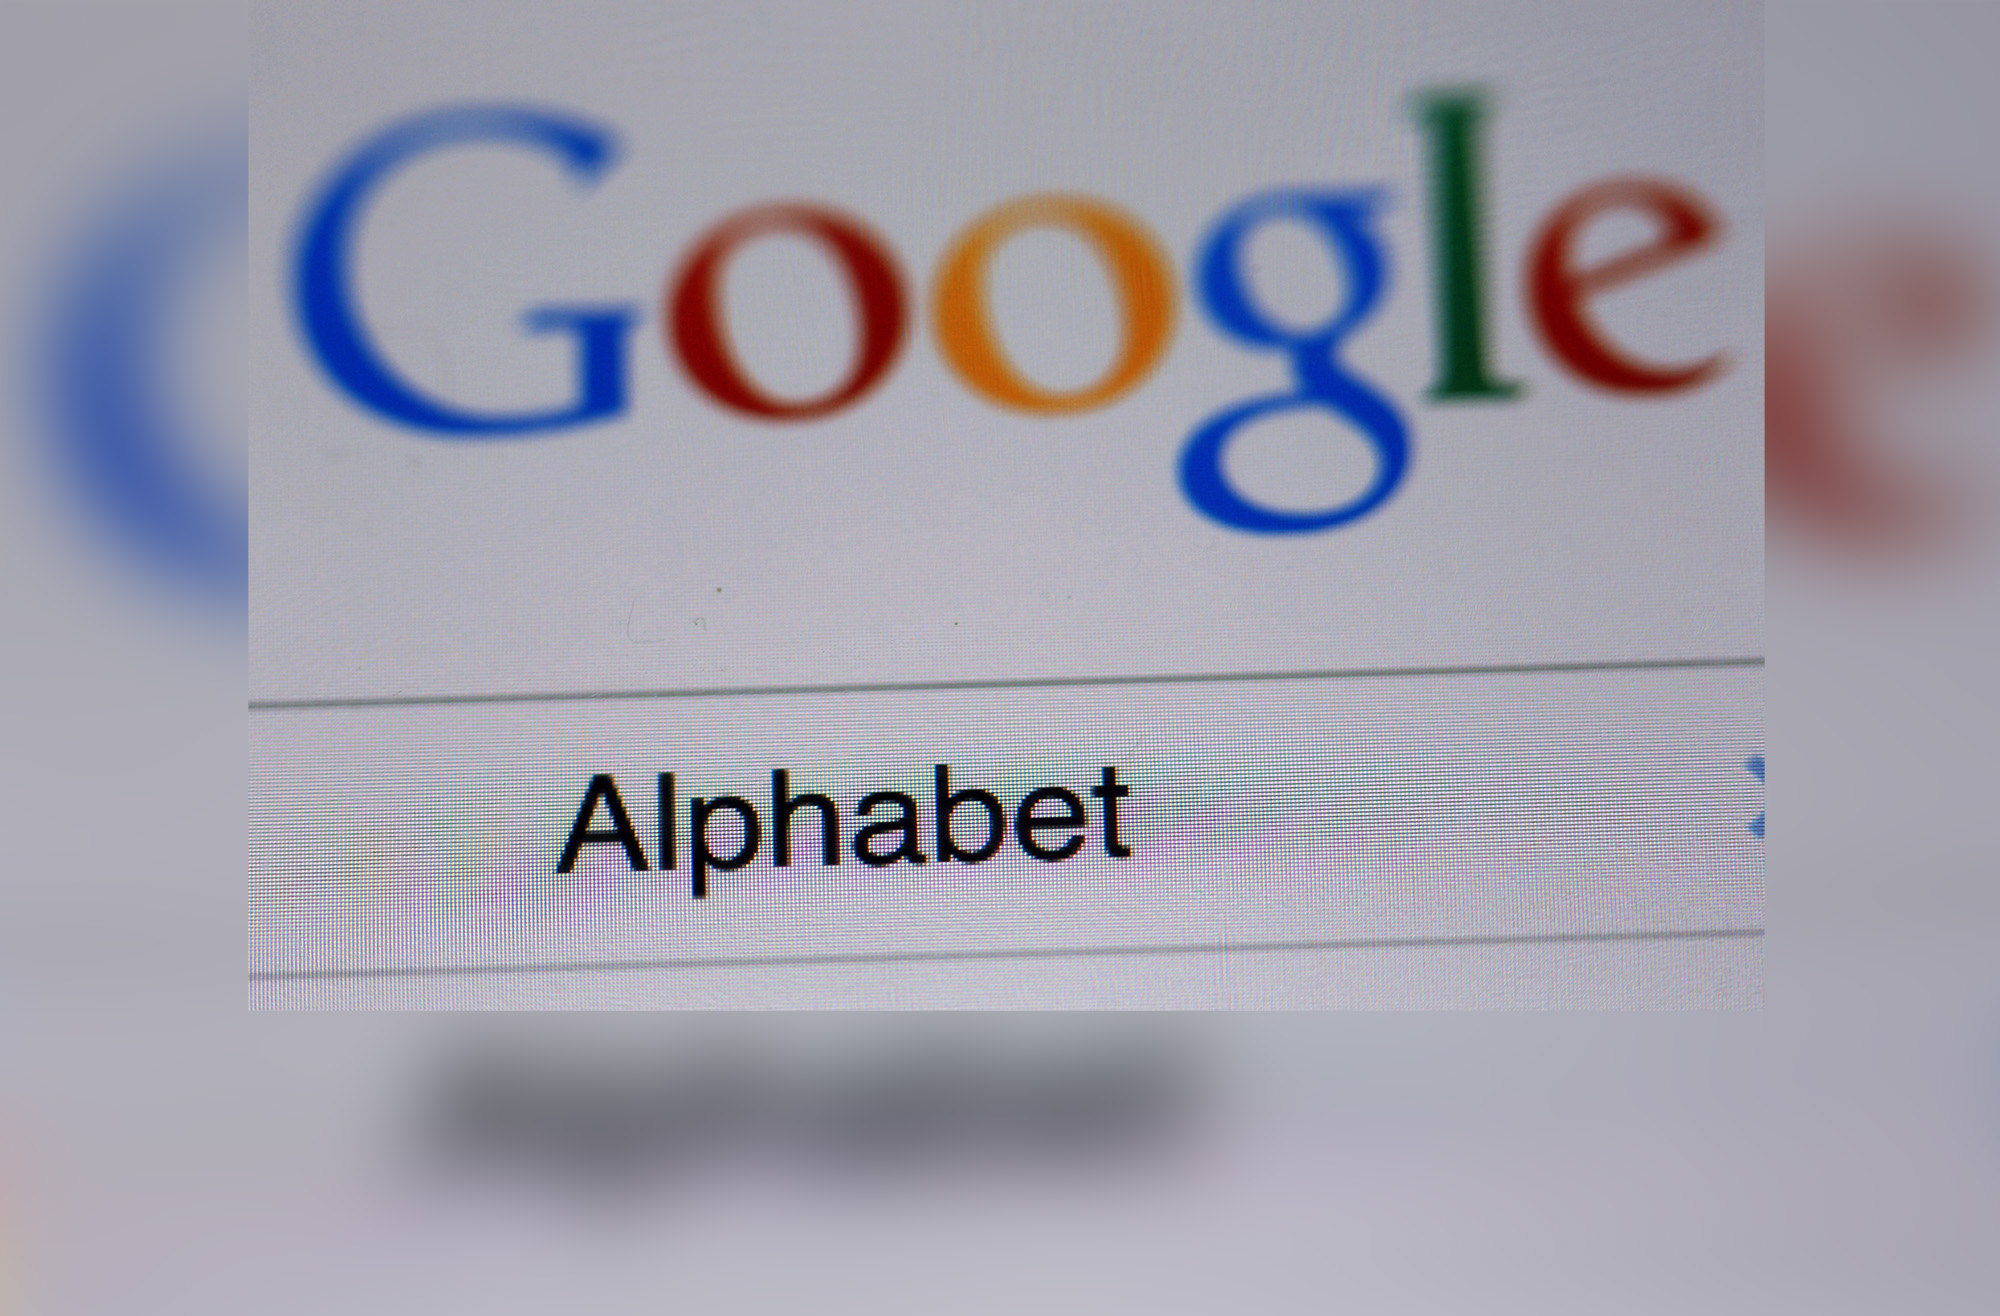 PHOTO: An illustration shows the term 'Alphabet' on a screen displaying the website of search engine Google on Aug. 11, 2015 in Schwerin, Germany. 